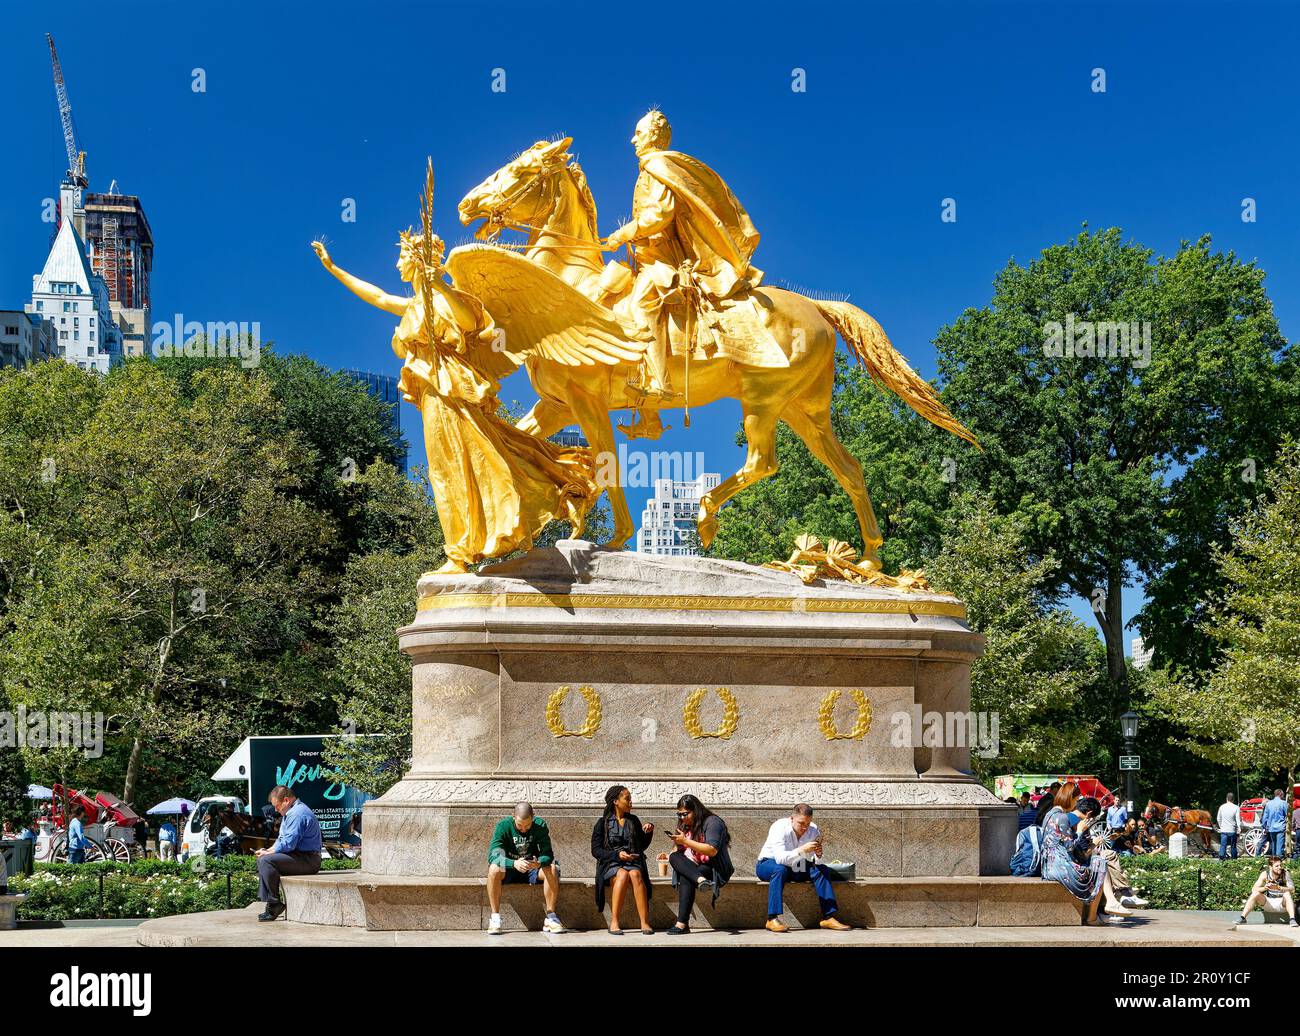 William Tecumseh Sherman Monument, in its re-gilded glory, but crowned in pigeon spikes. Stock Photo